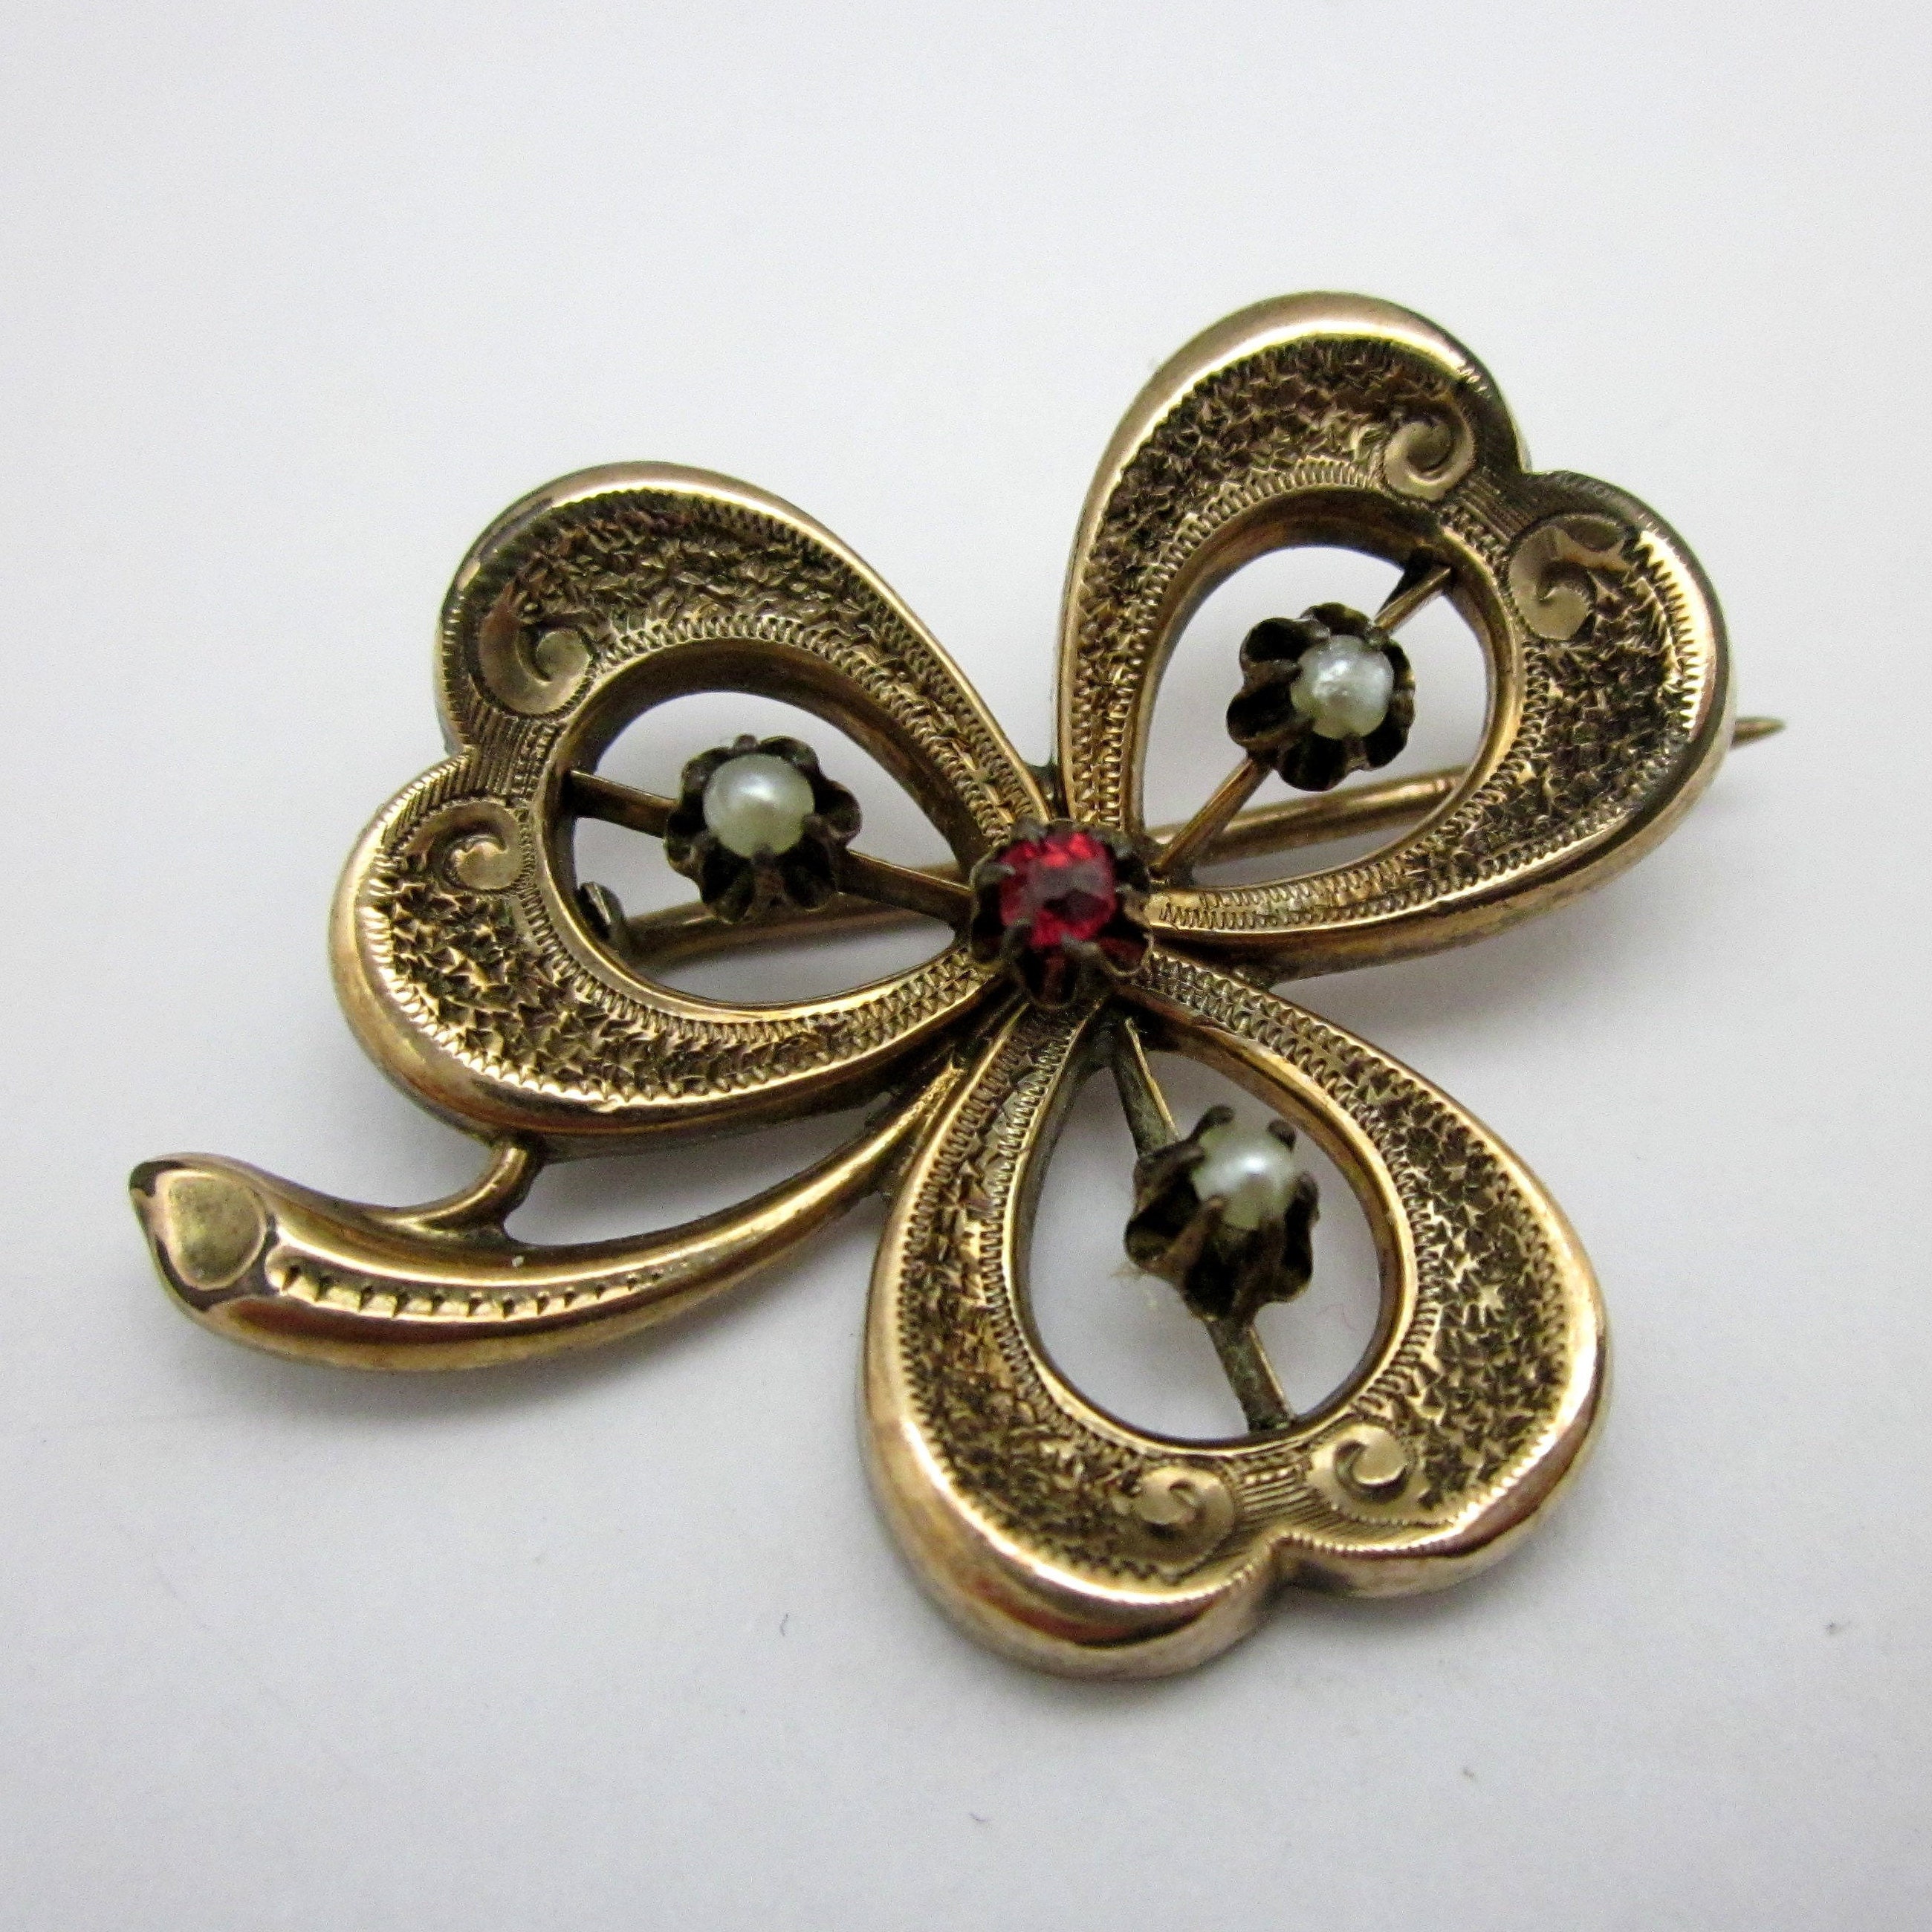 Antique Curved Scarf Pin with Purple Glass Gem and Vine Motif -  Copperfield's Gifts & Rarities